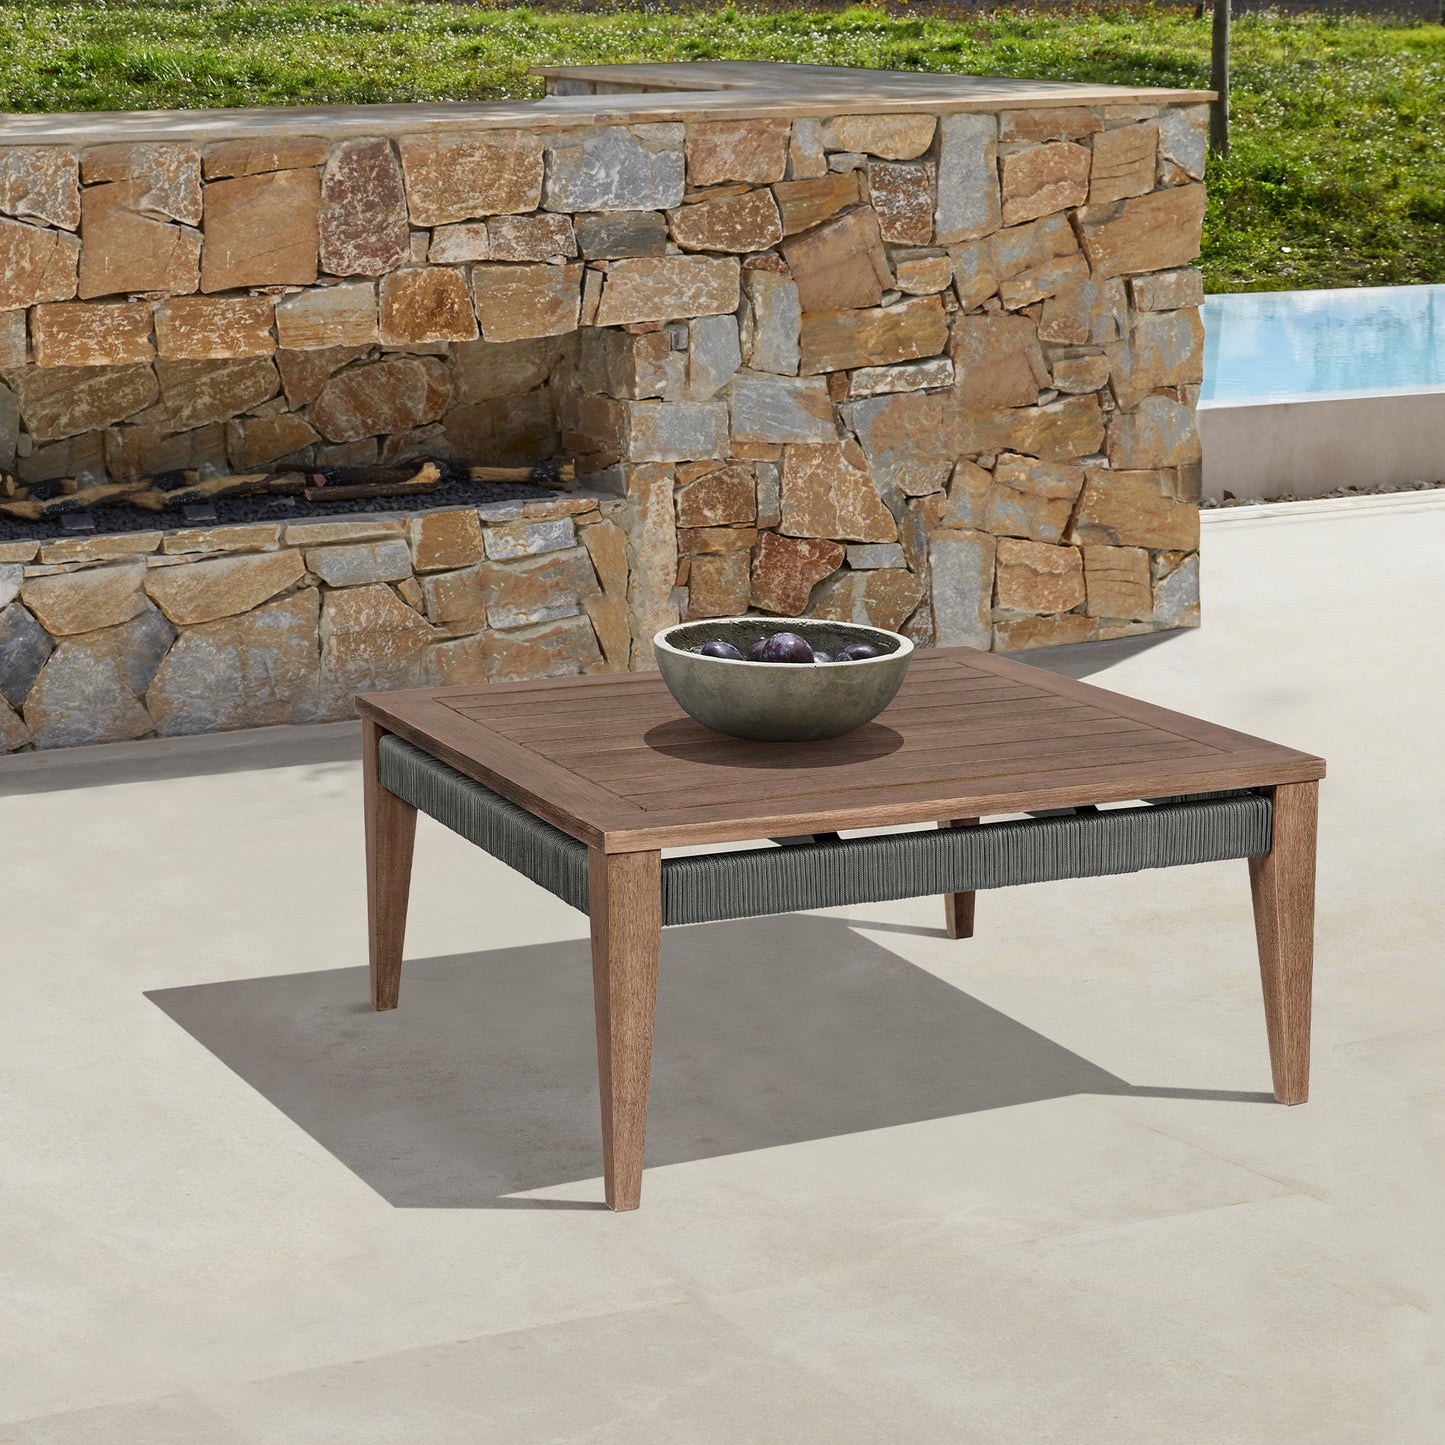 Orbit Square Outdoor Patio Coffee Table in Weathered Eucalyptus Wood